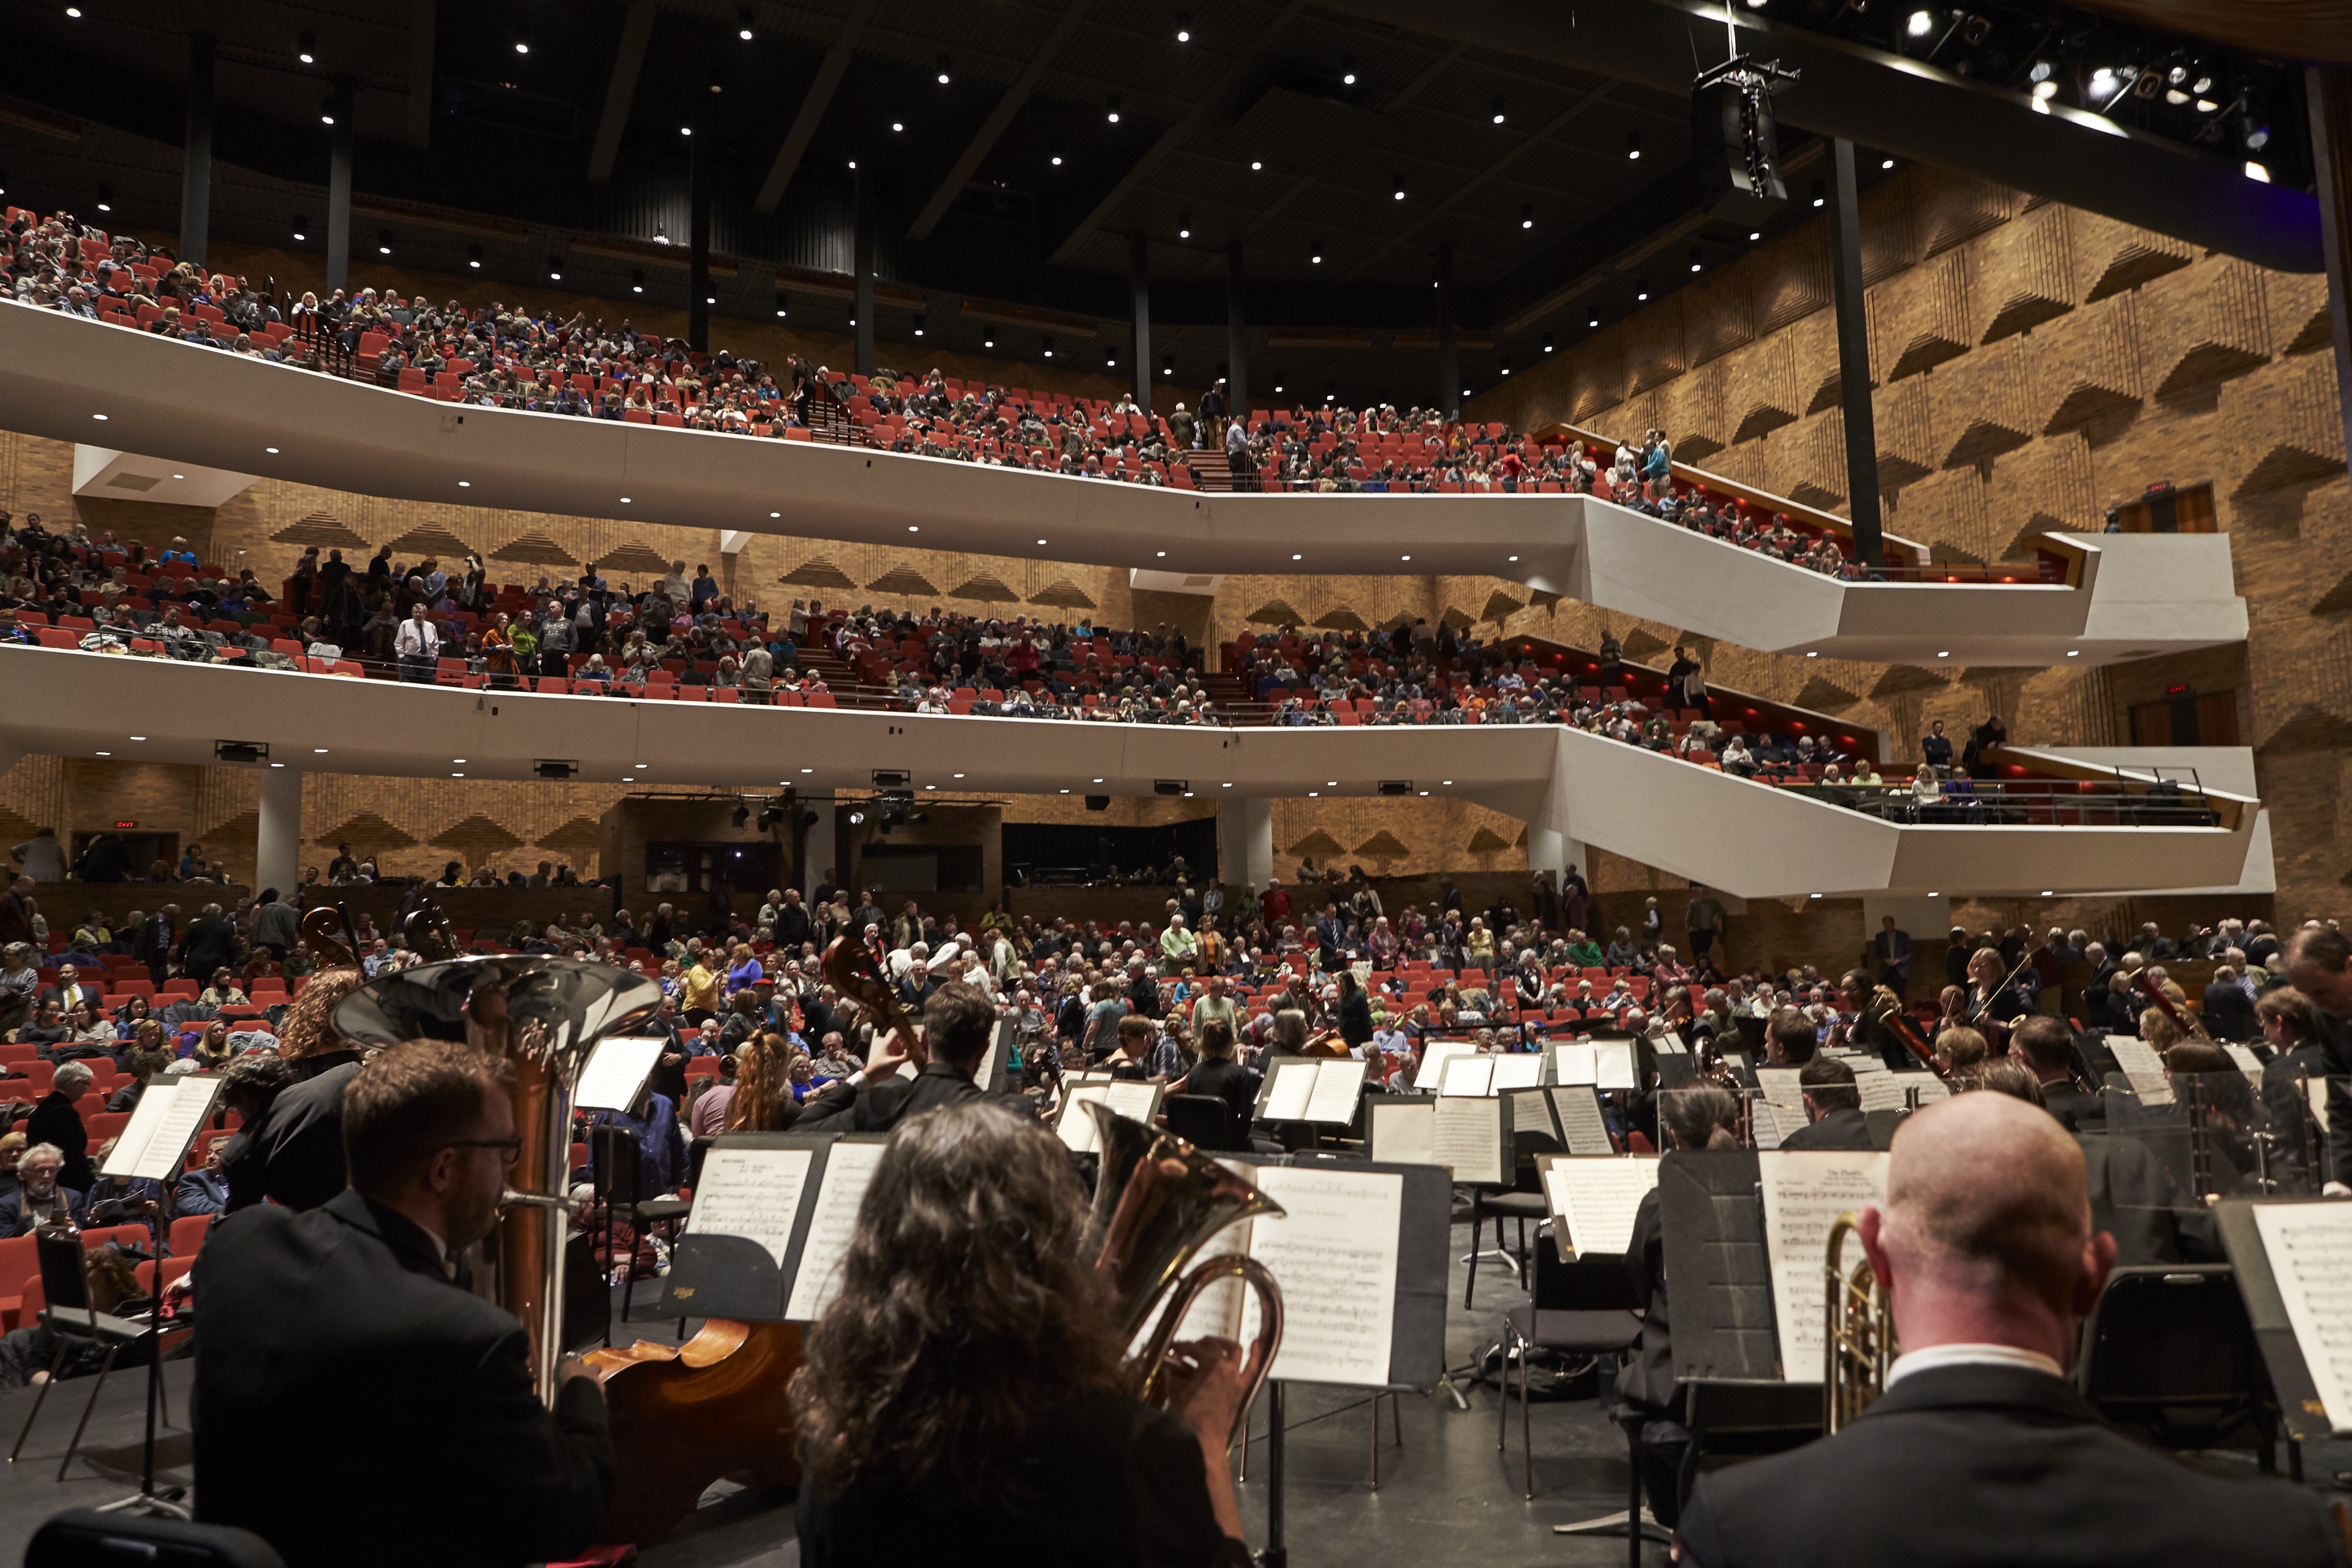 Hamilton Philharmonic Orchestra playing at FirstOntario Concert Hall.